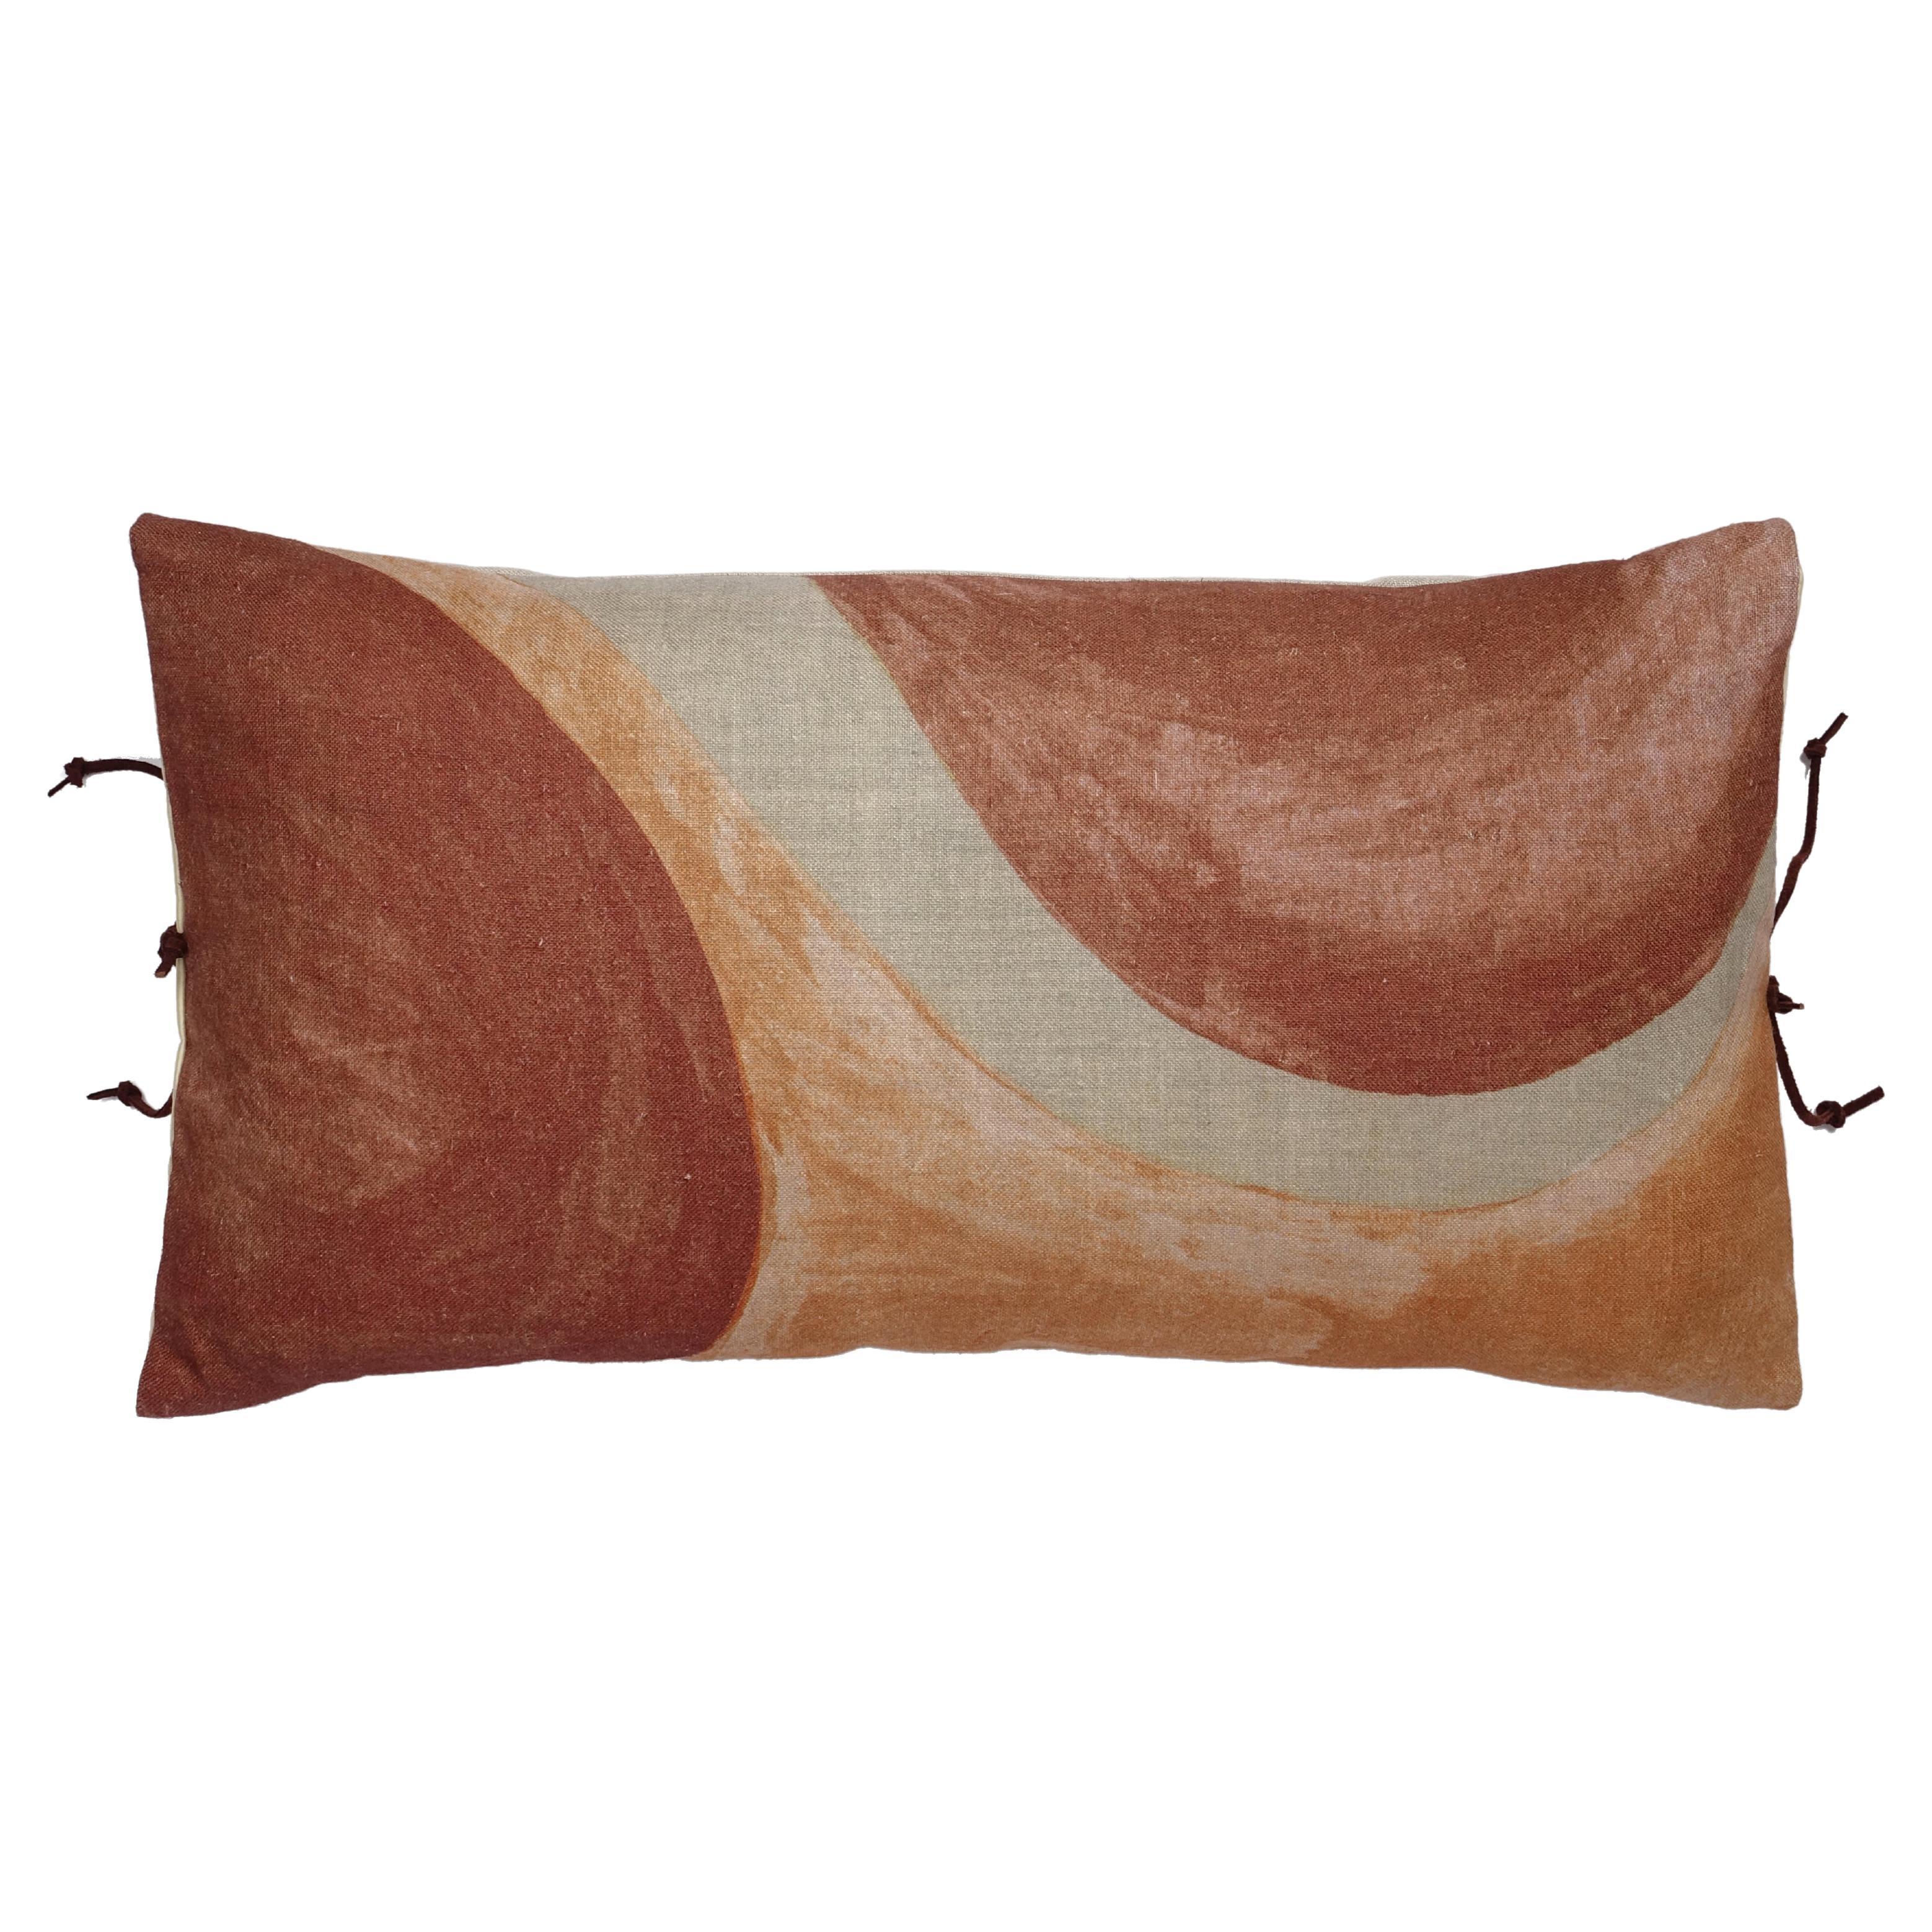 Printed Linen Pillow Winding Sienna Blush 12x22 For Sale